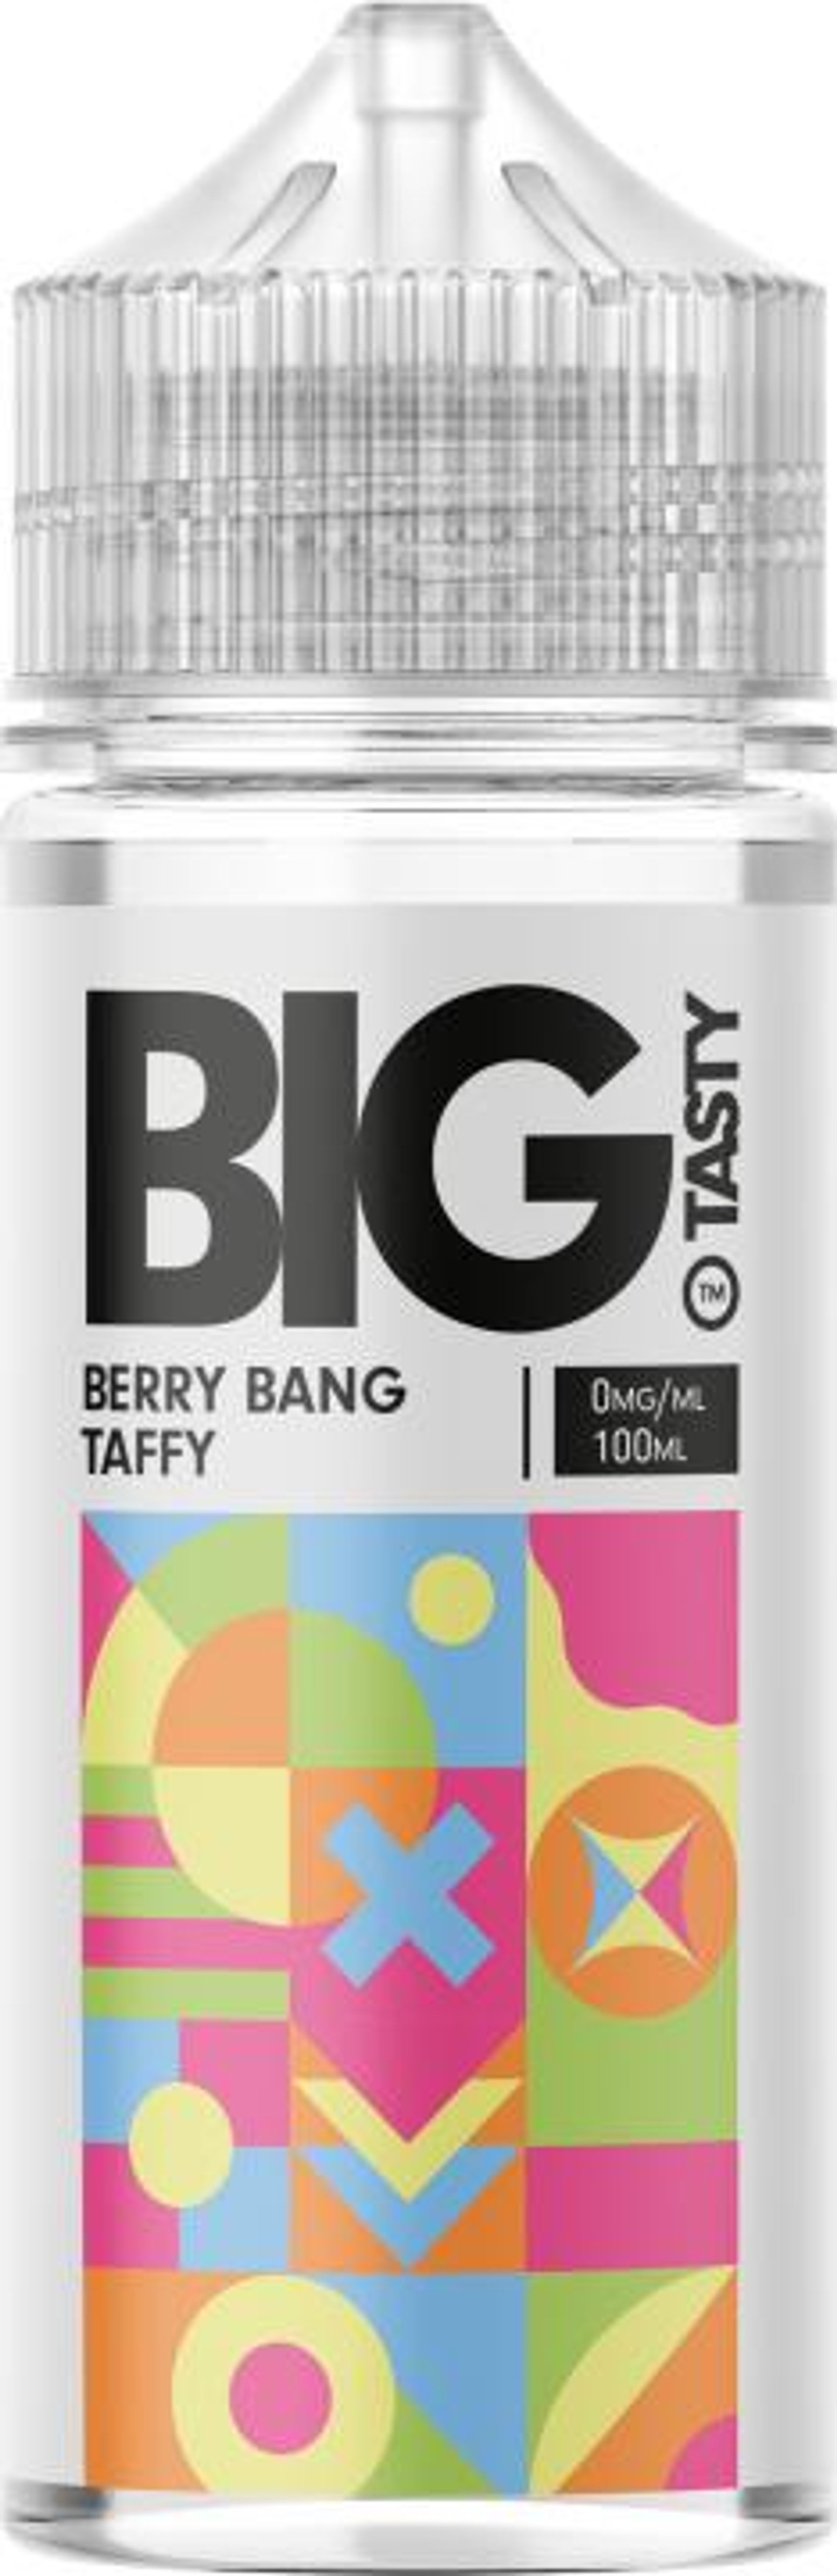 Image of Berry Bang Taffy by Big Tasty